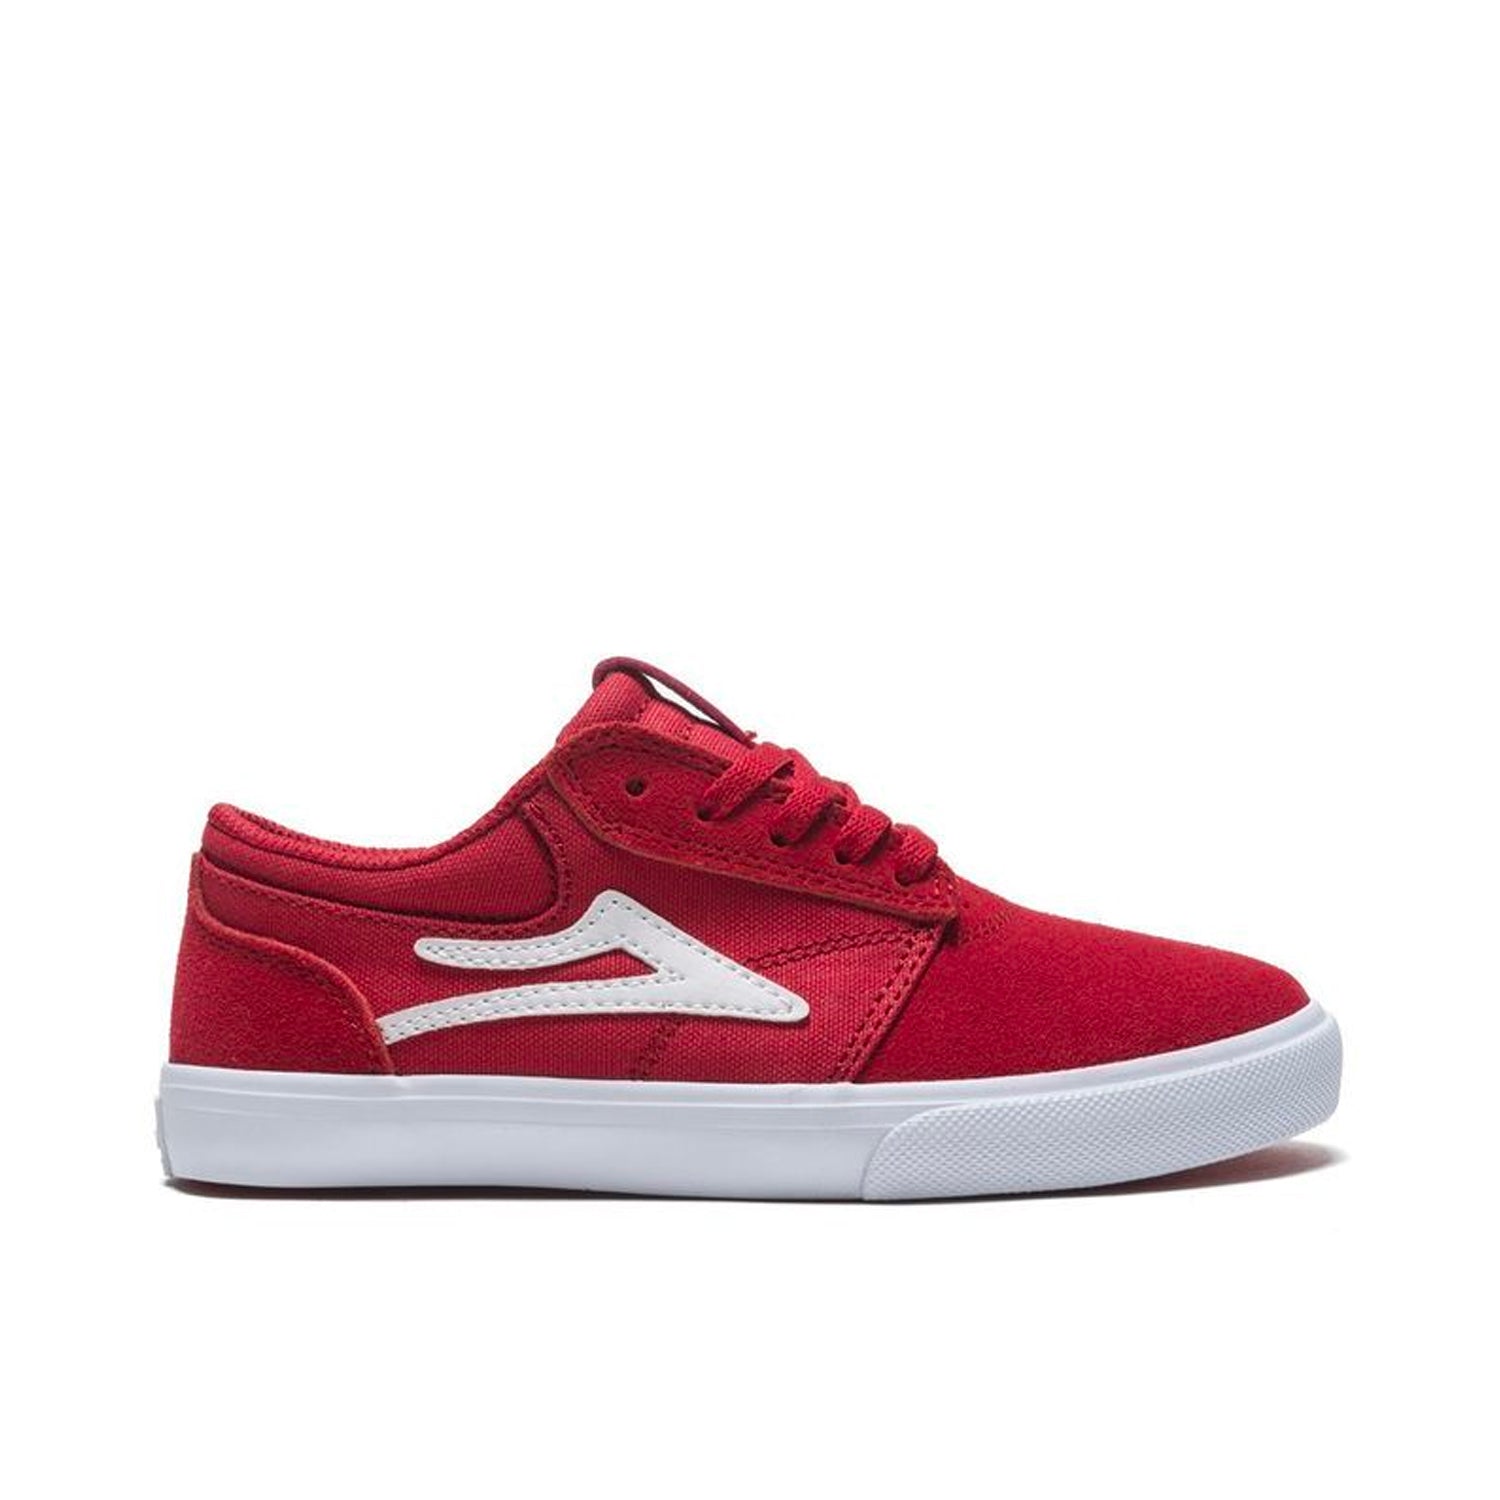 Lakai Griffin Kids Suede - Flame - Prime Delux Store